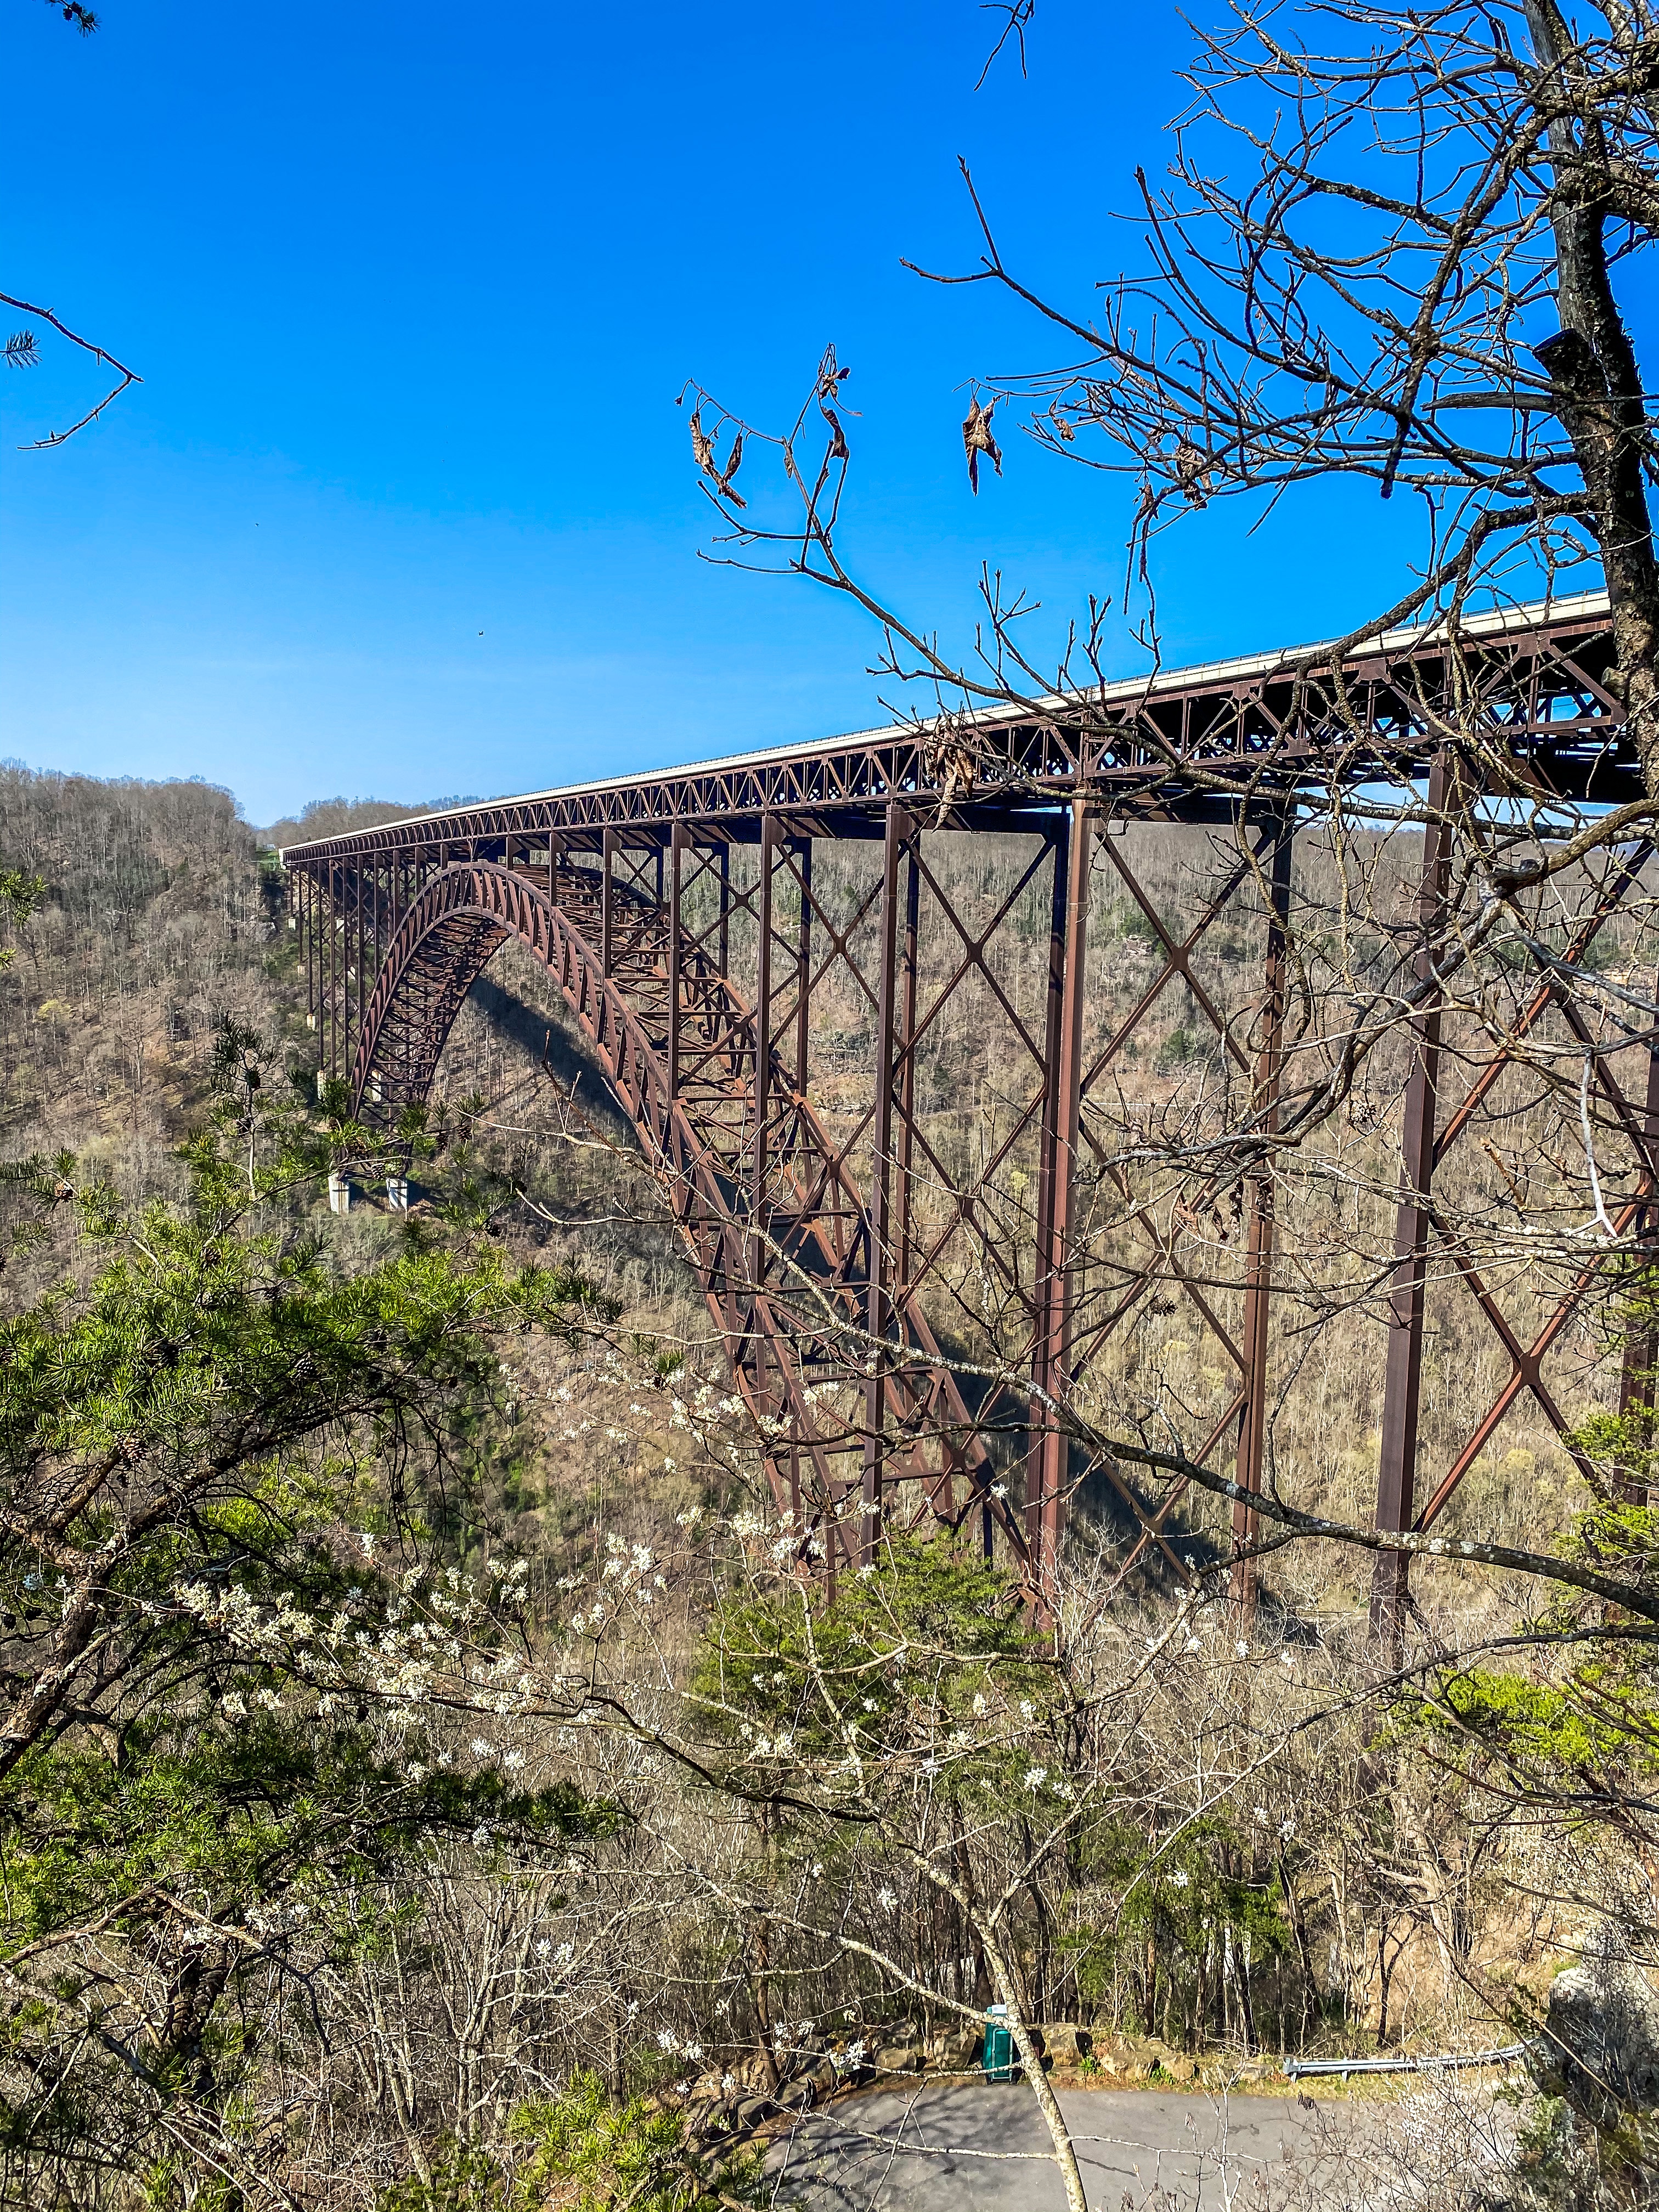 New River Gorge National Park: 2 Day Adventure